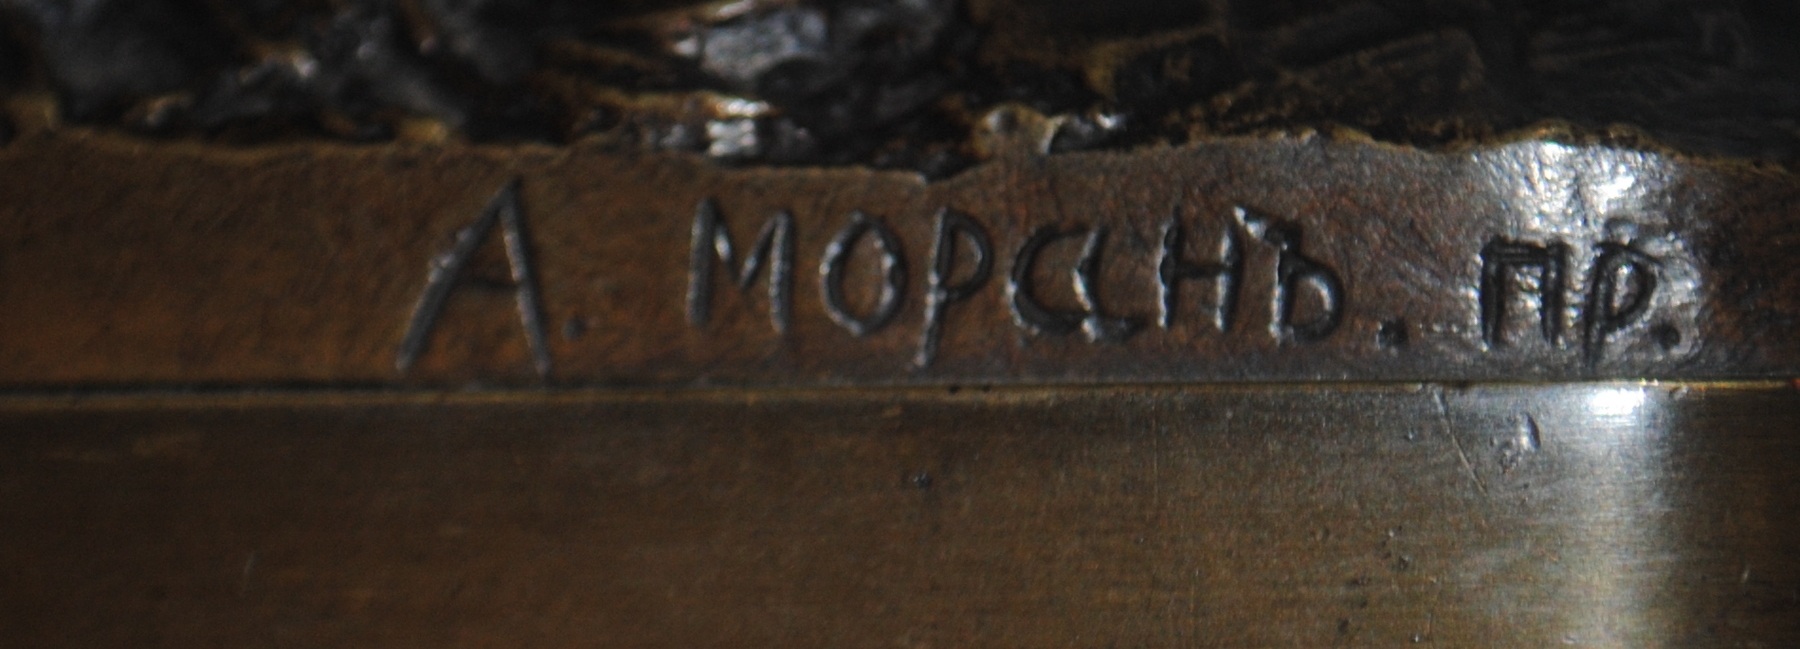 AFTER A MODEL BY EVGENY LANCERAY, INSCRIBED WITH A SIGNATURE IN CYRILLIC